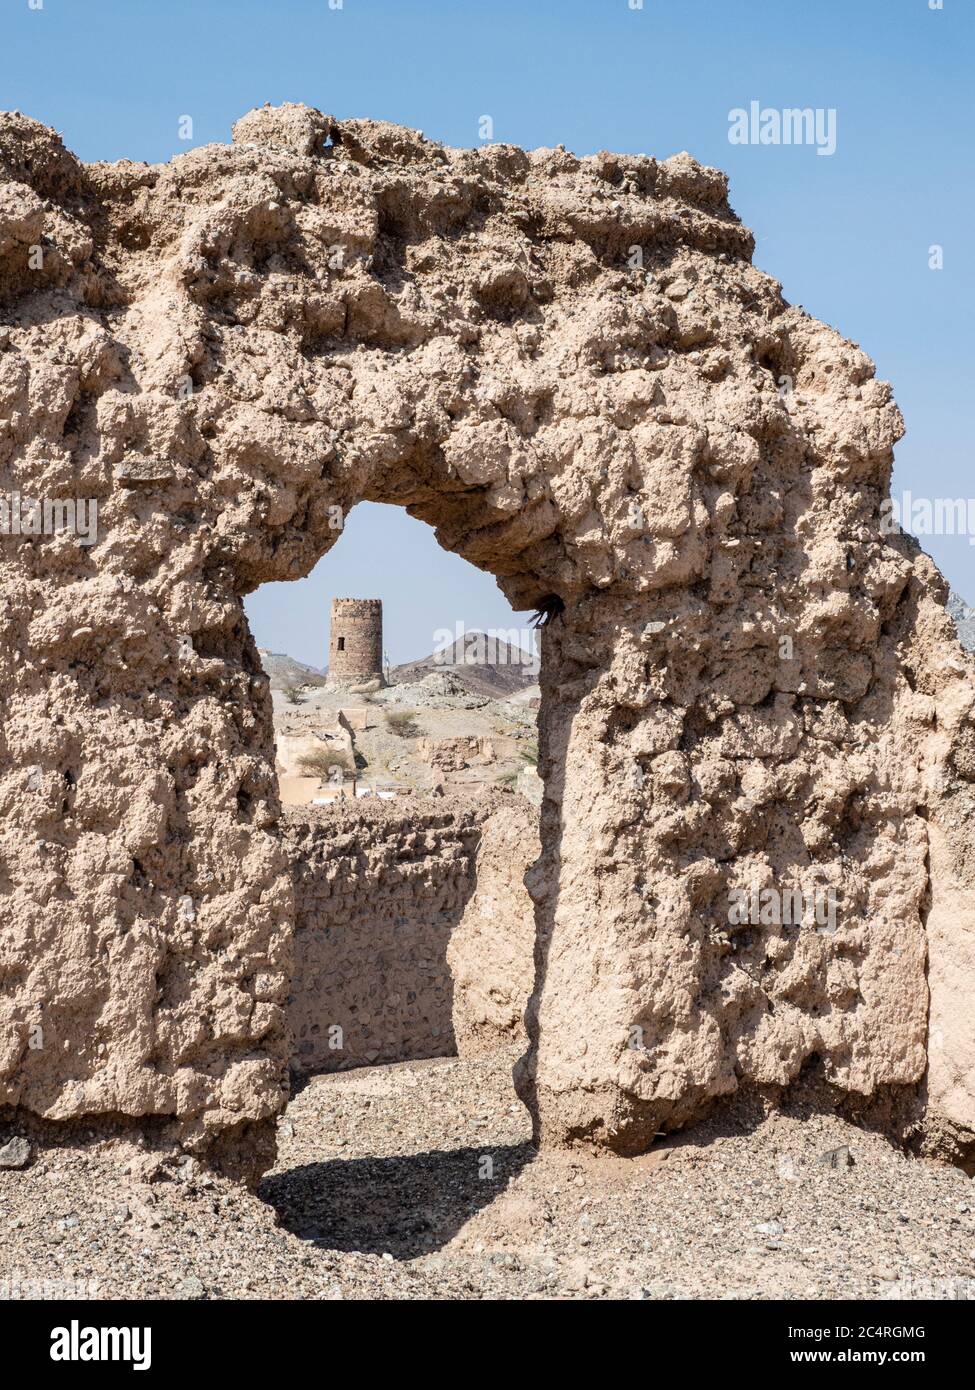 Remains of the mud and clay watch towers in the village of Mudayrib, Sultanate of Oman. Stock Photo